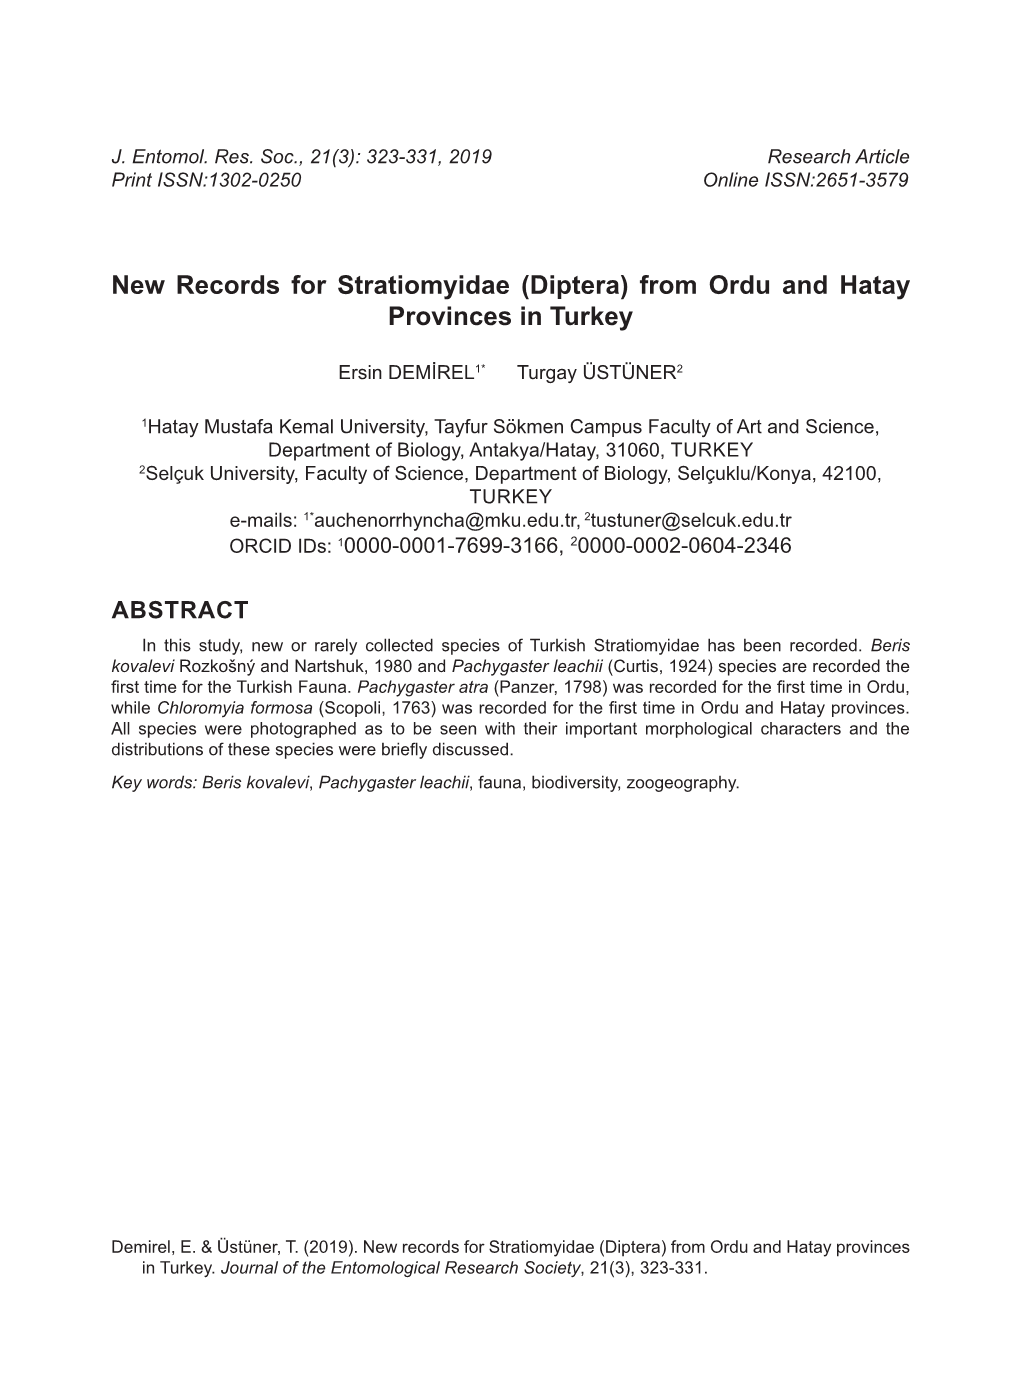 New Records for Stratiomyidae (Diptera) from Ordu and Hatay Provinces in Turkey